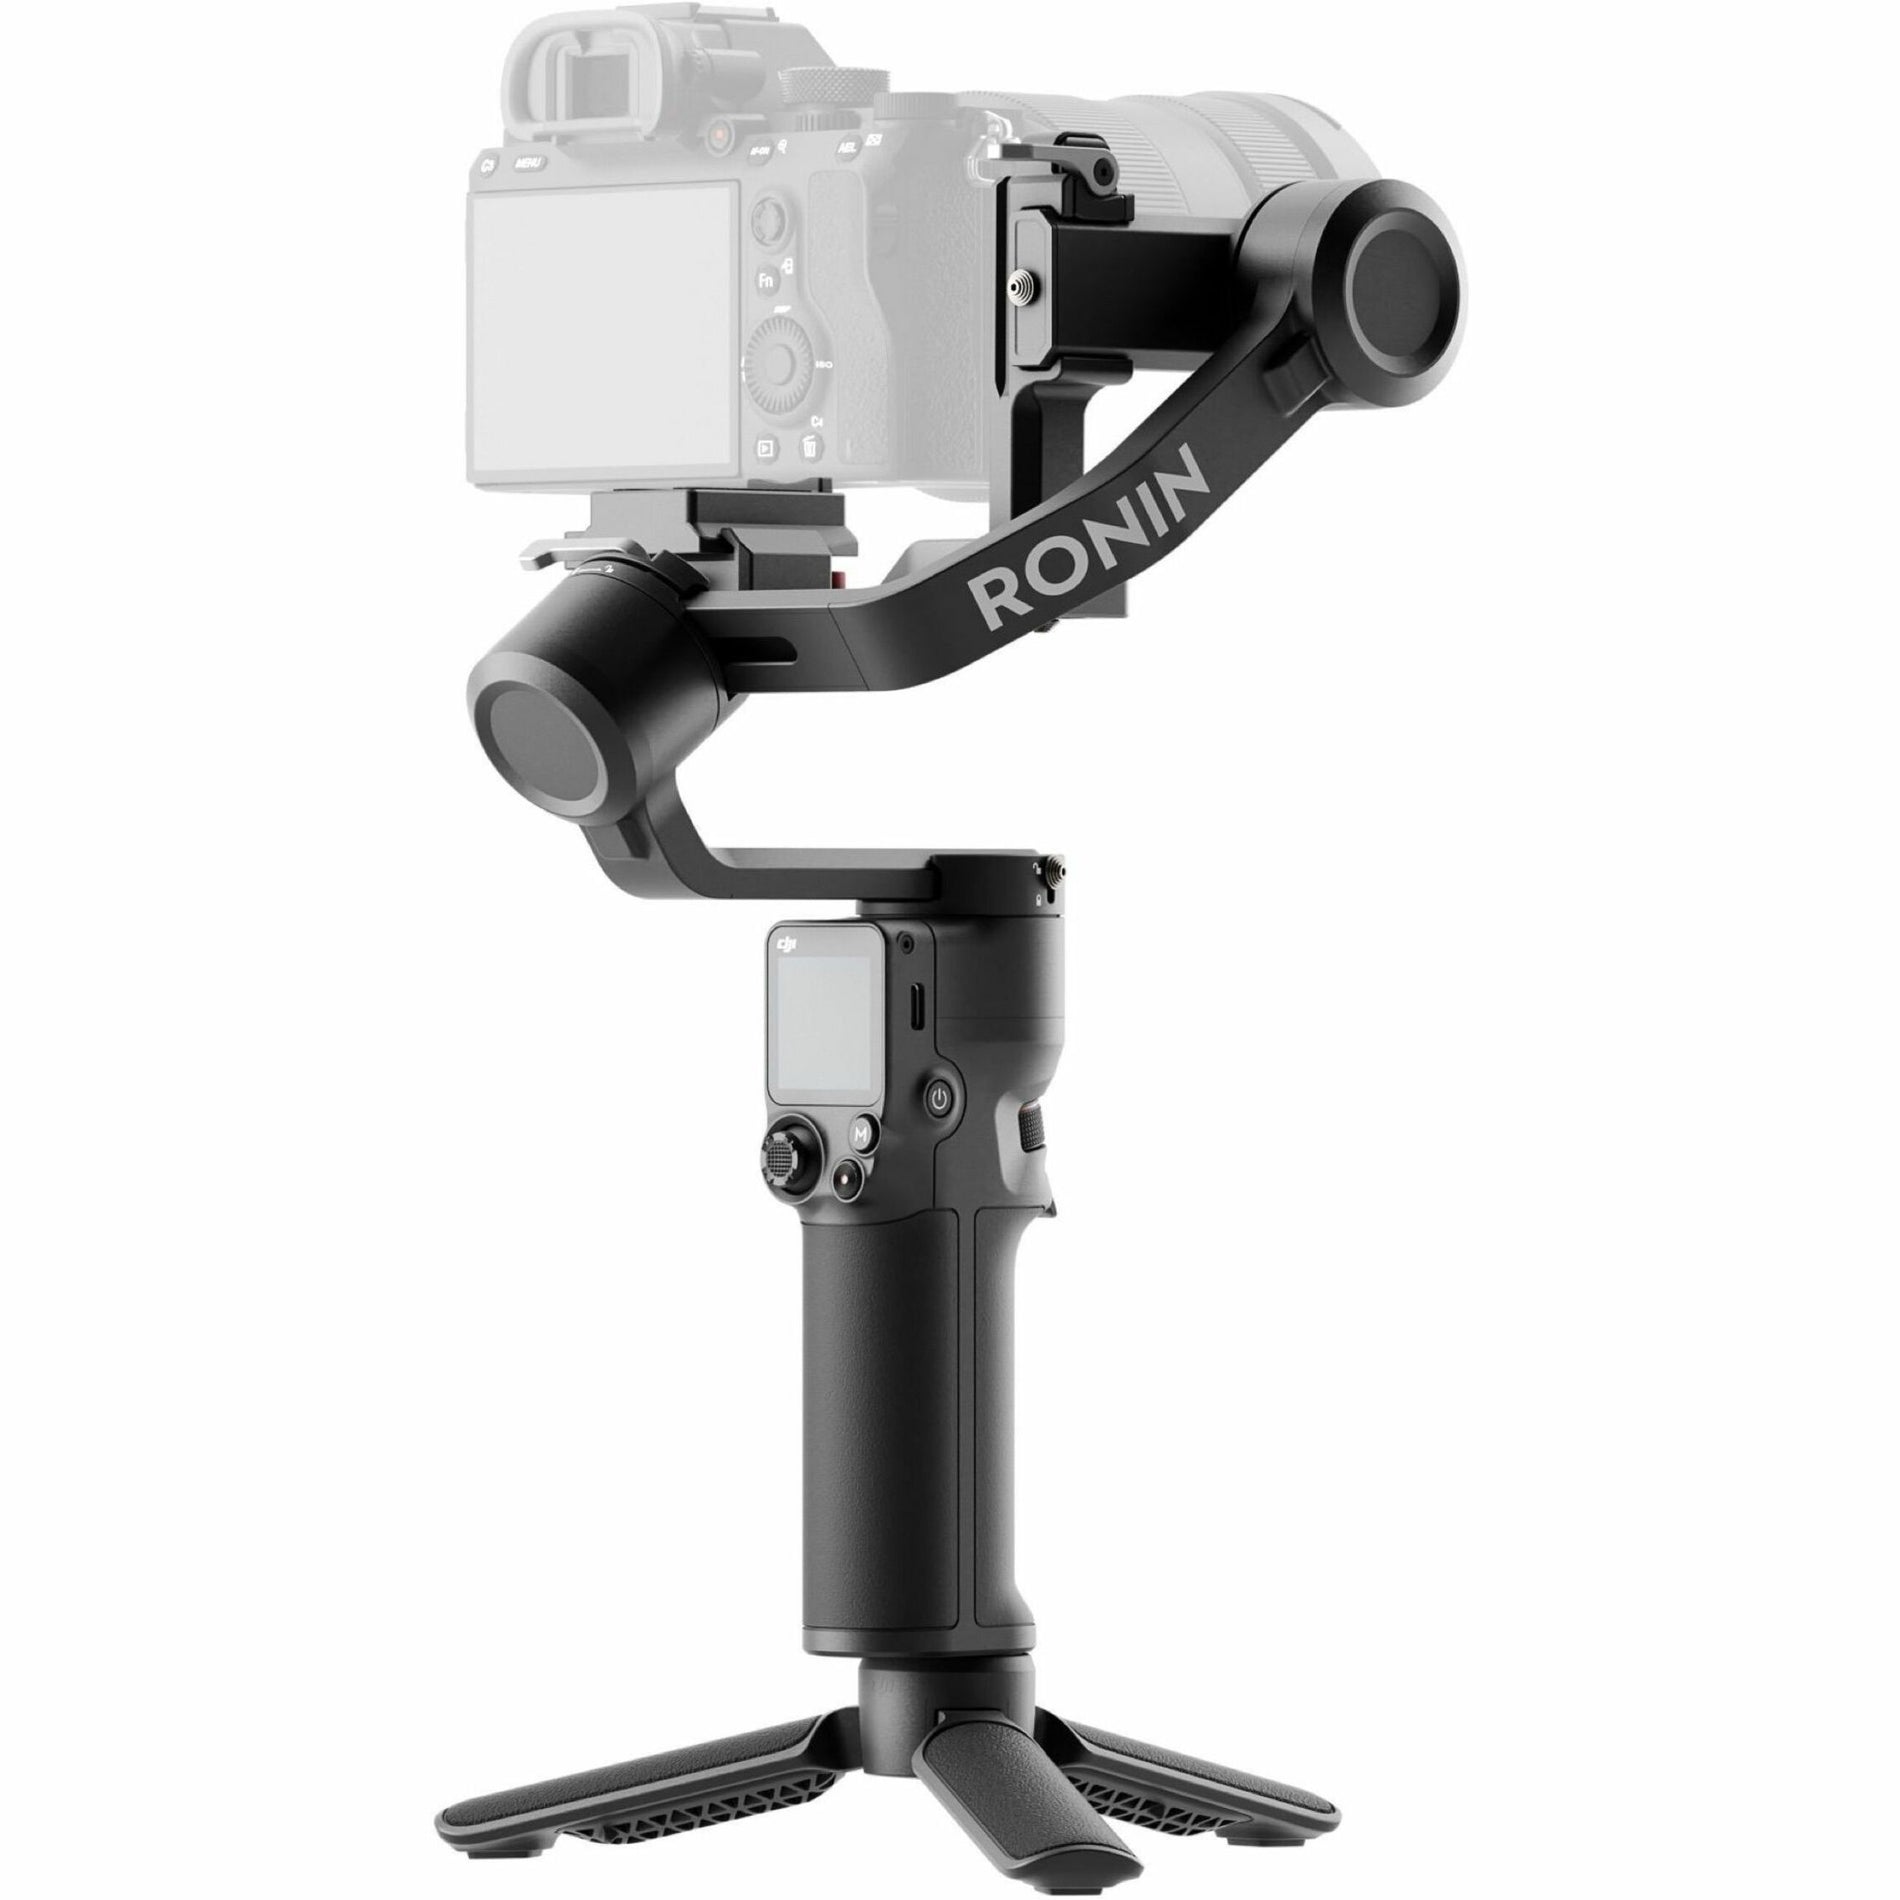 DJI CP.RN.00000294.01 RS 3 Mini Gimbal Stabilizer, Lightweight and Versatile Camera Stabilizer for Smooth Video Footage